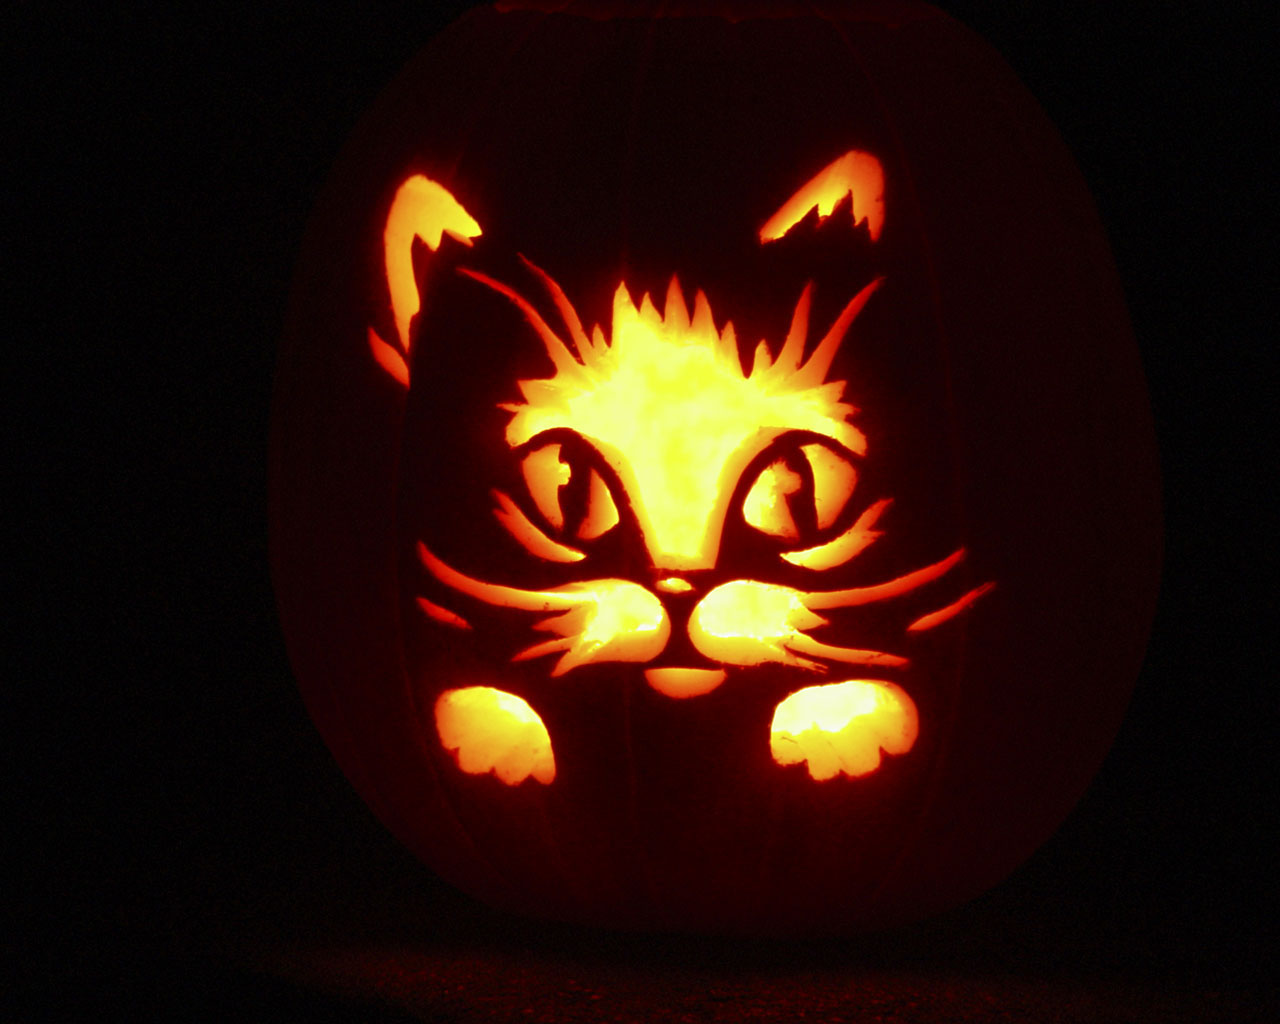 Its Nice And Amazing Template For Halloween Celebrate Cat